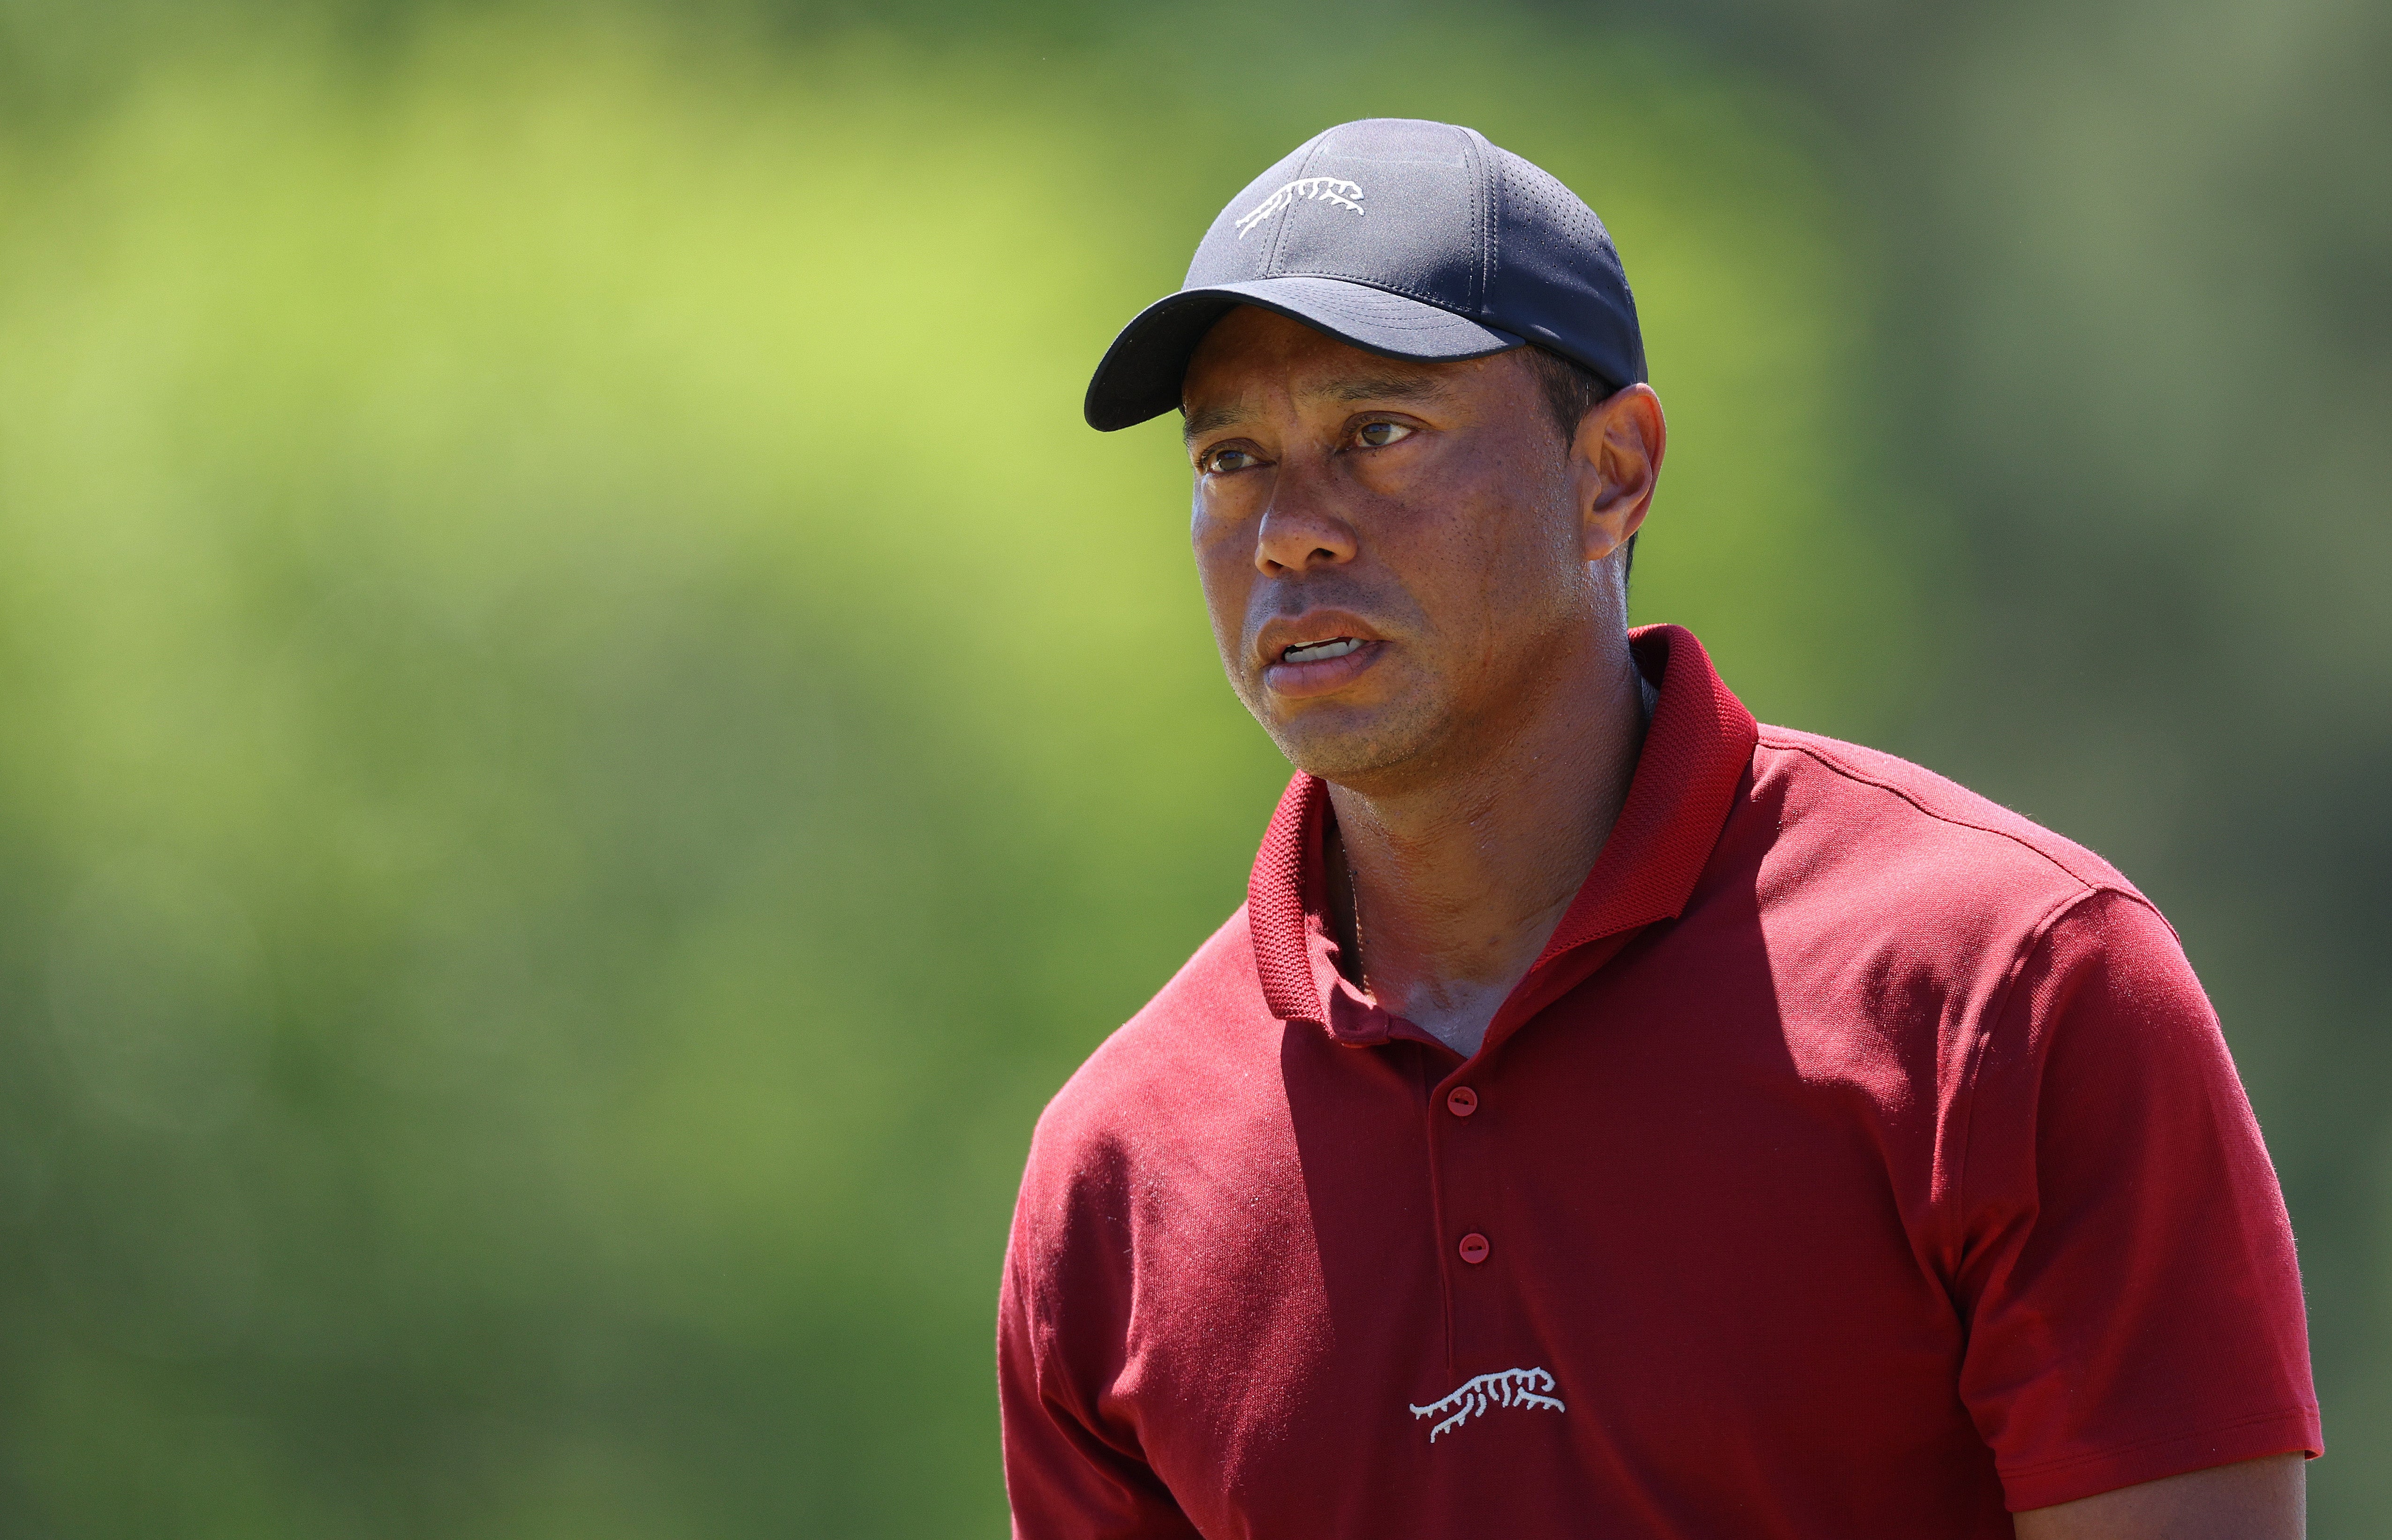 Tiger Woods wore his new range at the Masters earlier this year